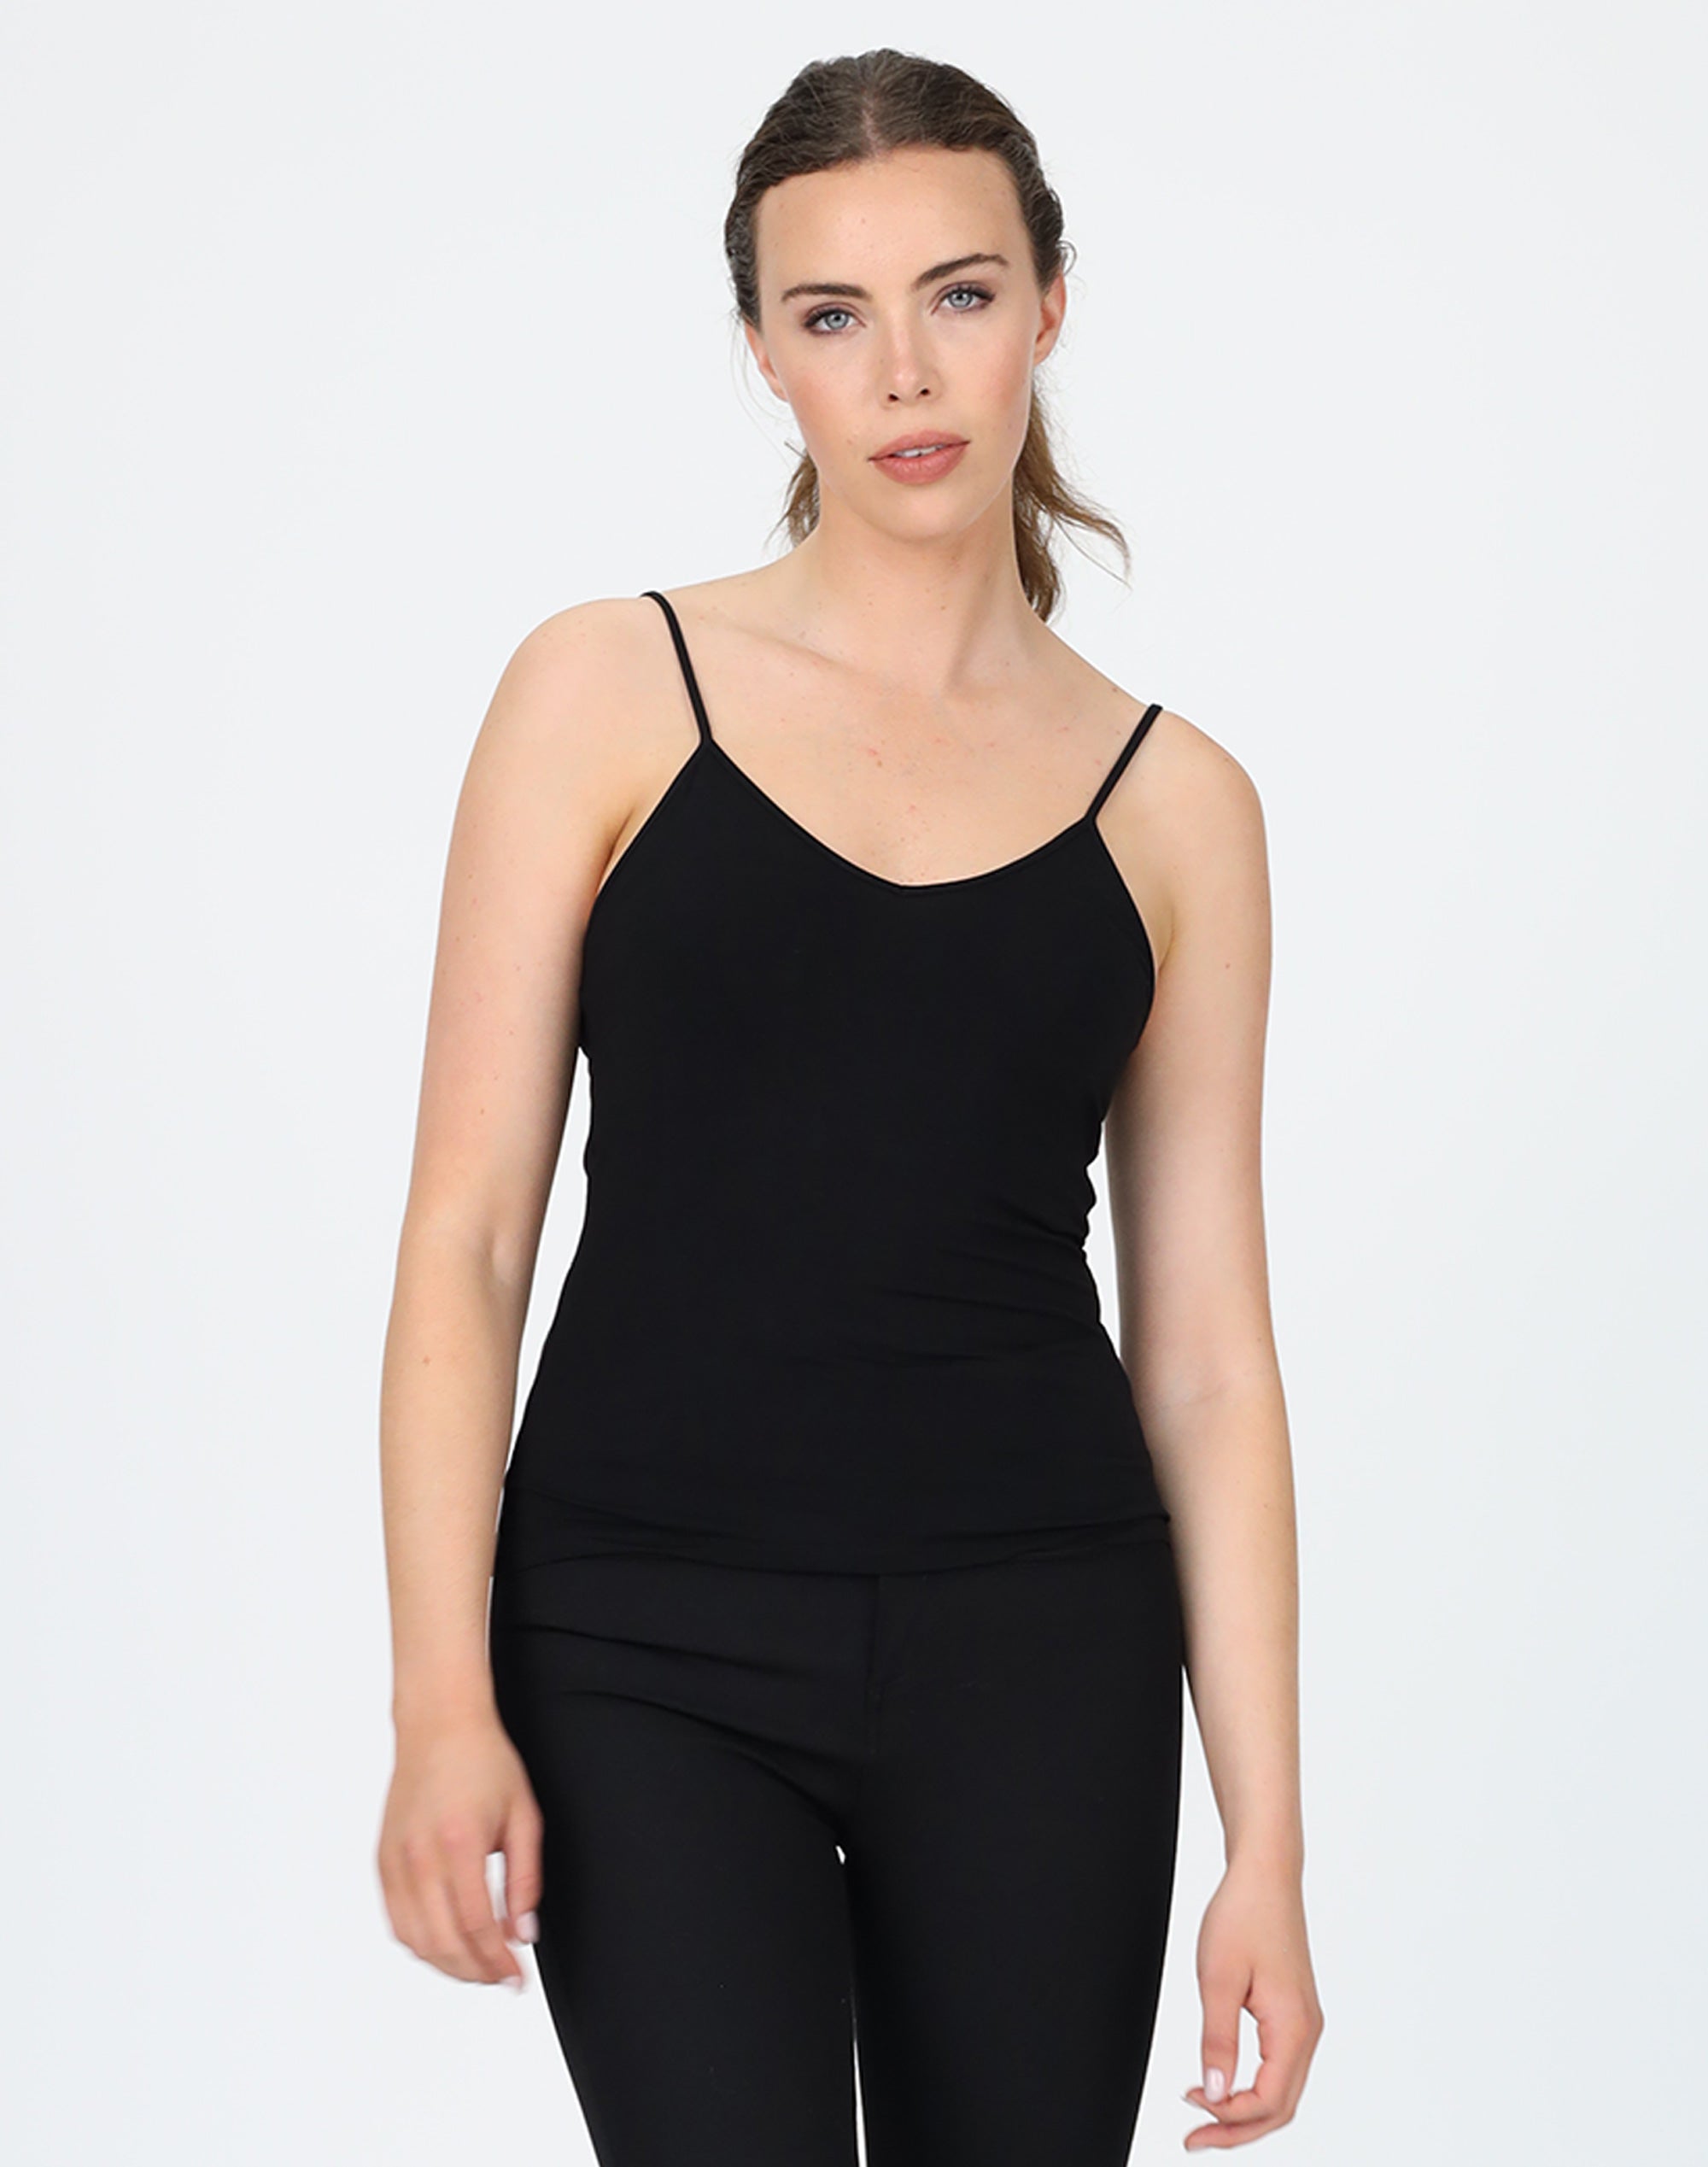 Essential Knit Cami - Black - Tops - Sleeveless - Women's Clothing